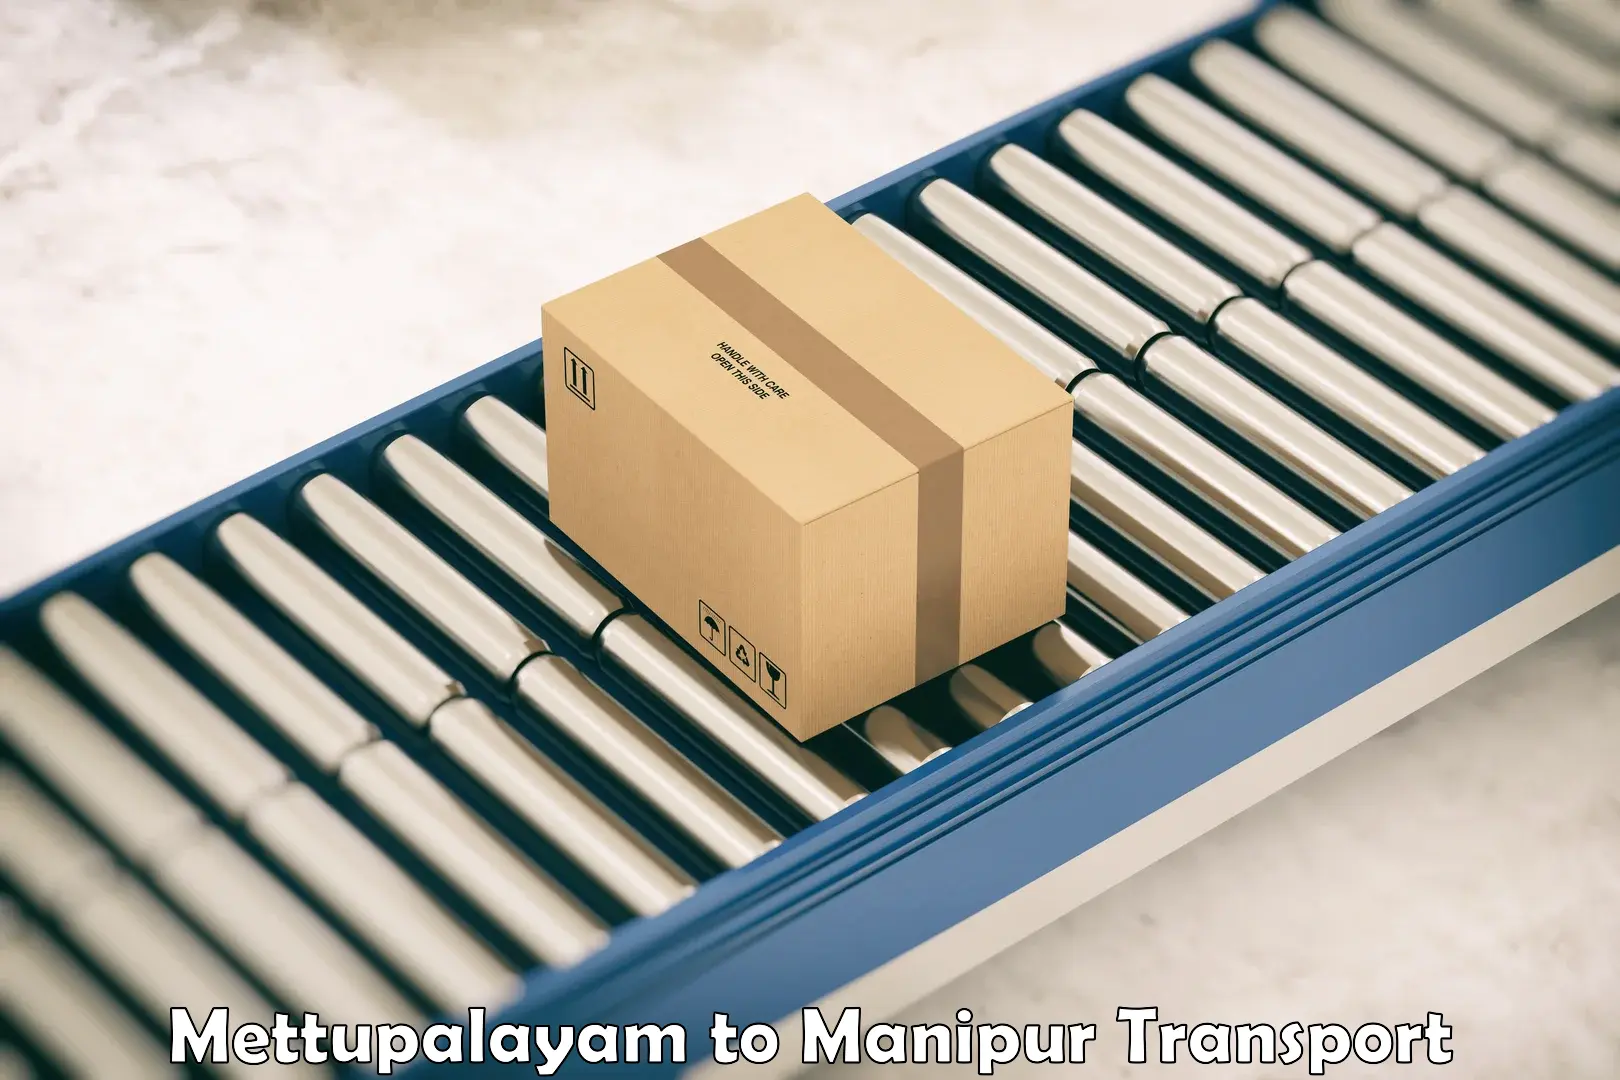 Daily parcel service transport Mettupalayam to Manipur